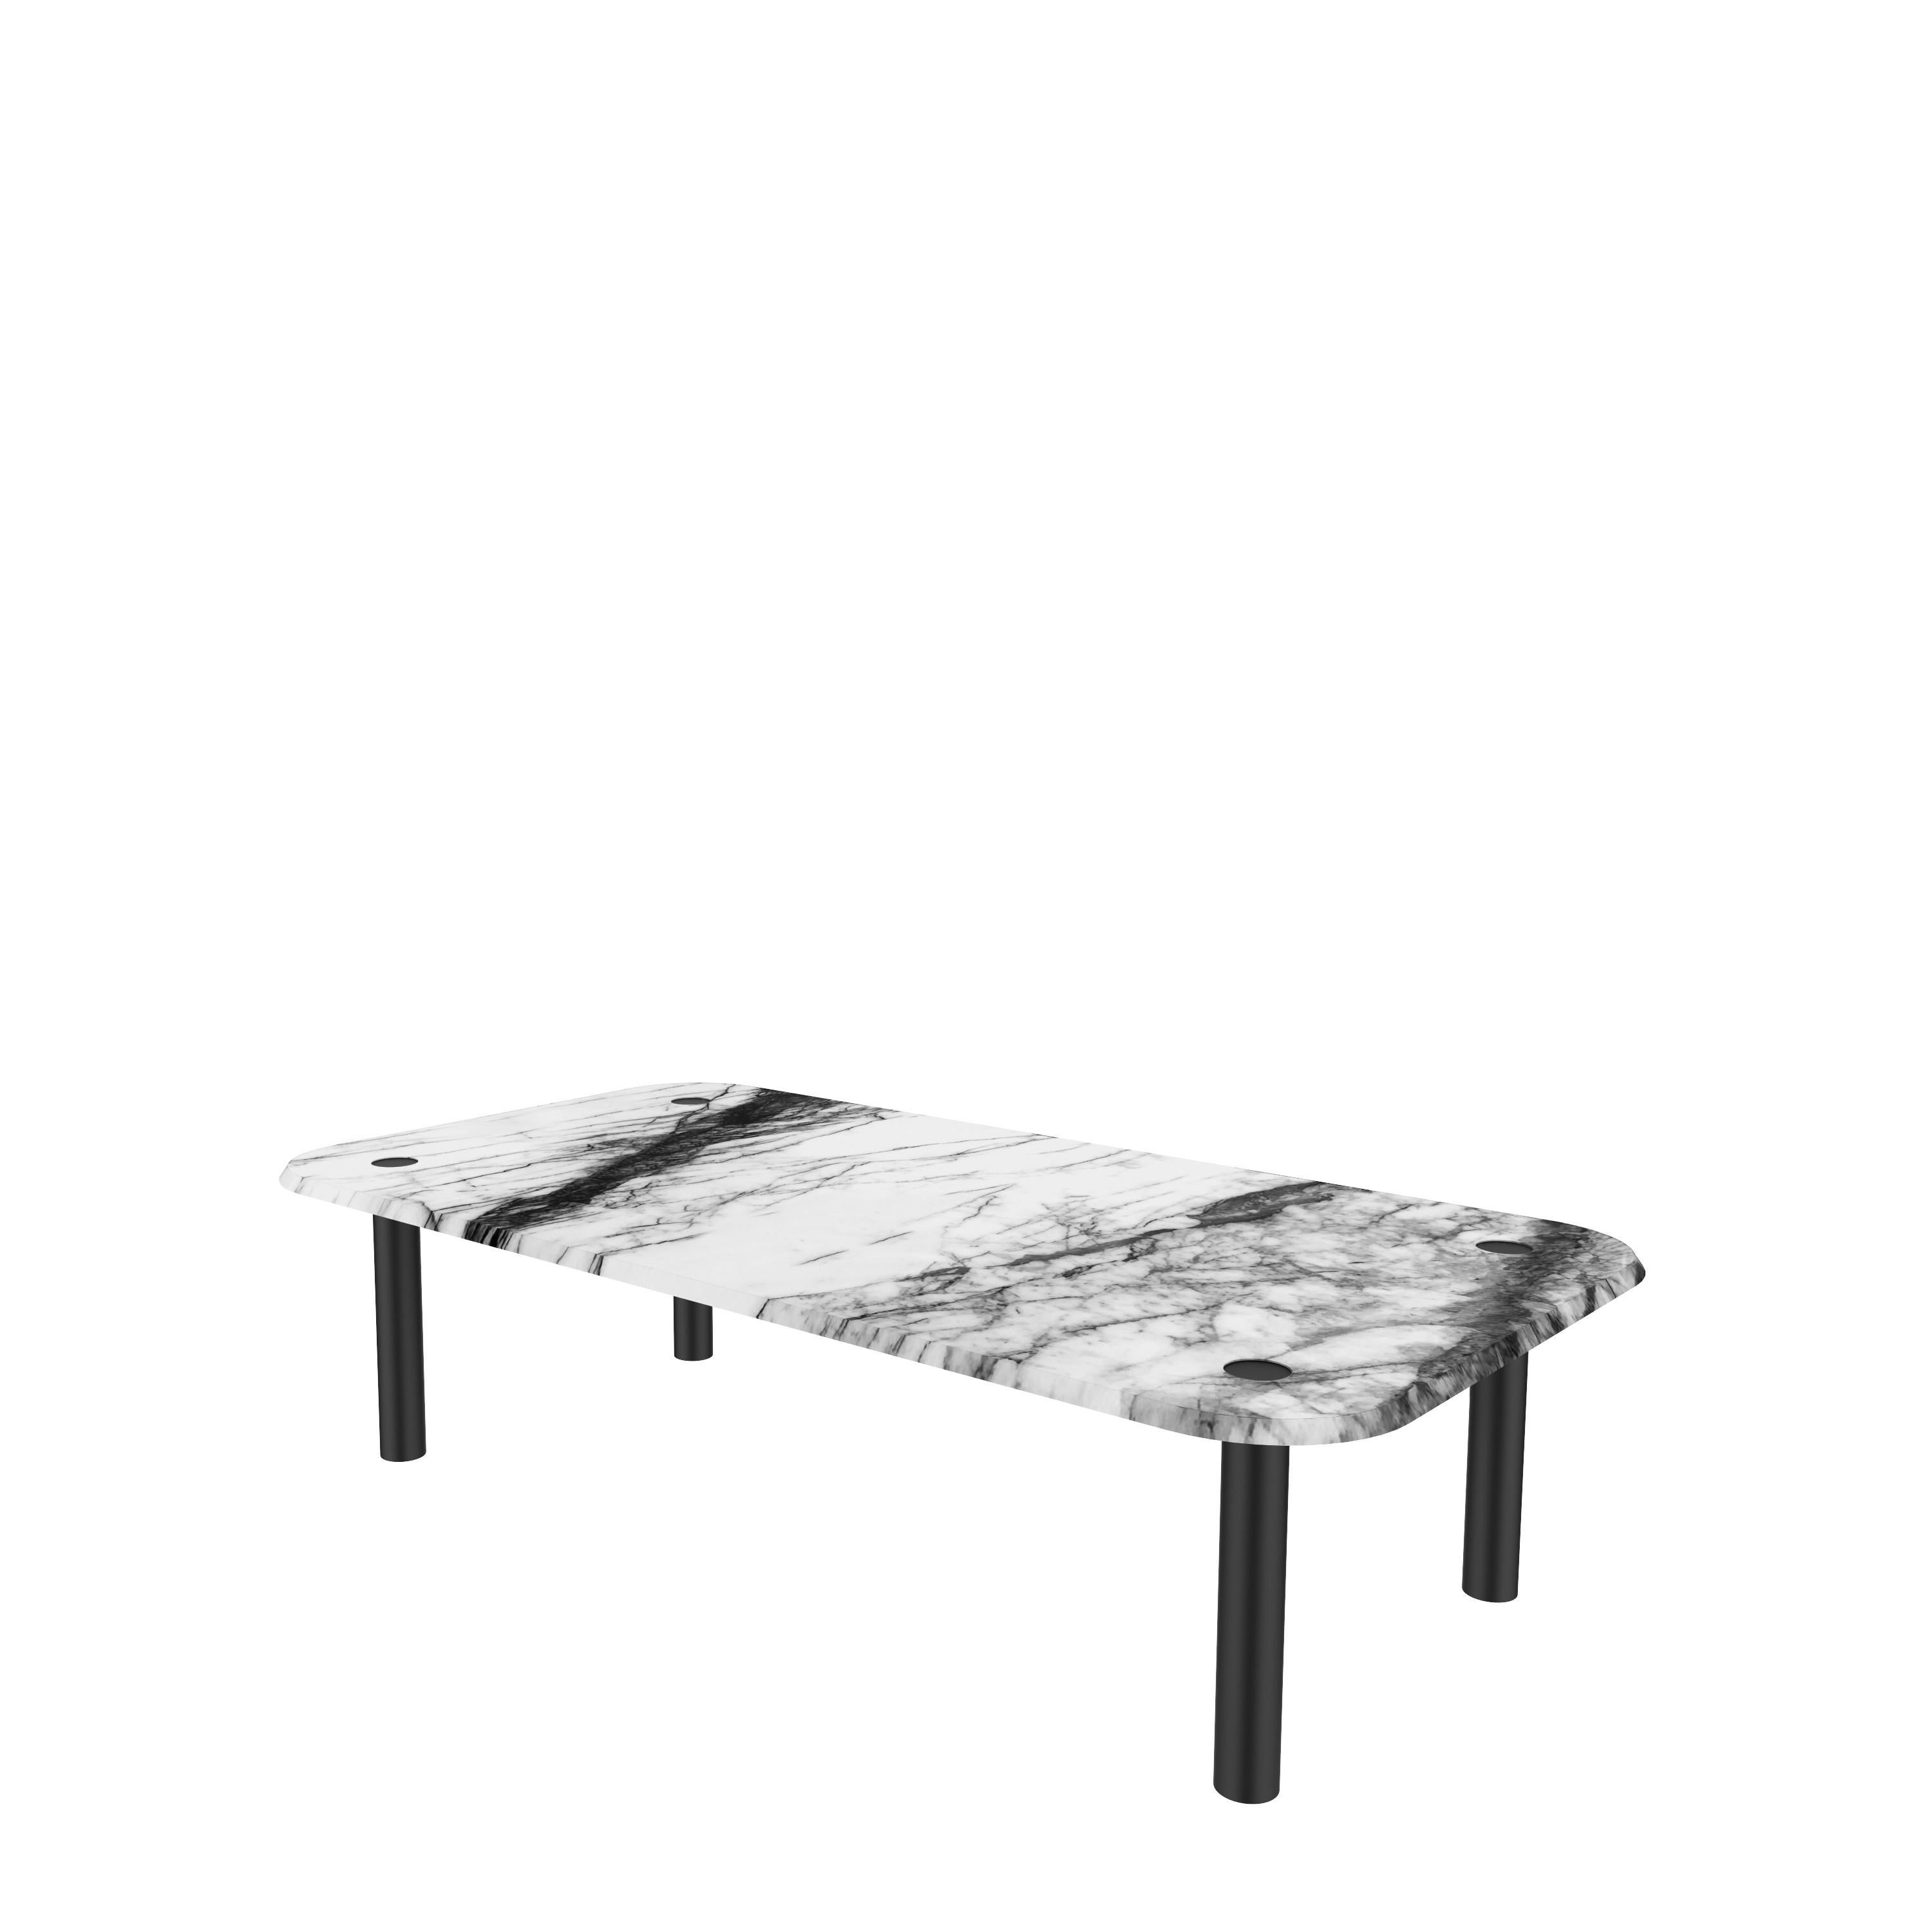 Chinese NORDST SEM Coffee Table, Italian Black Eagle Marble, Danish Modern Design, New For Sale